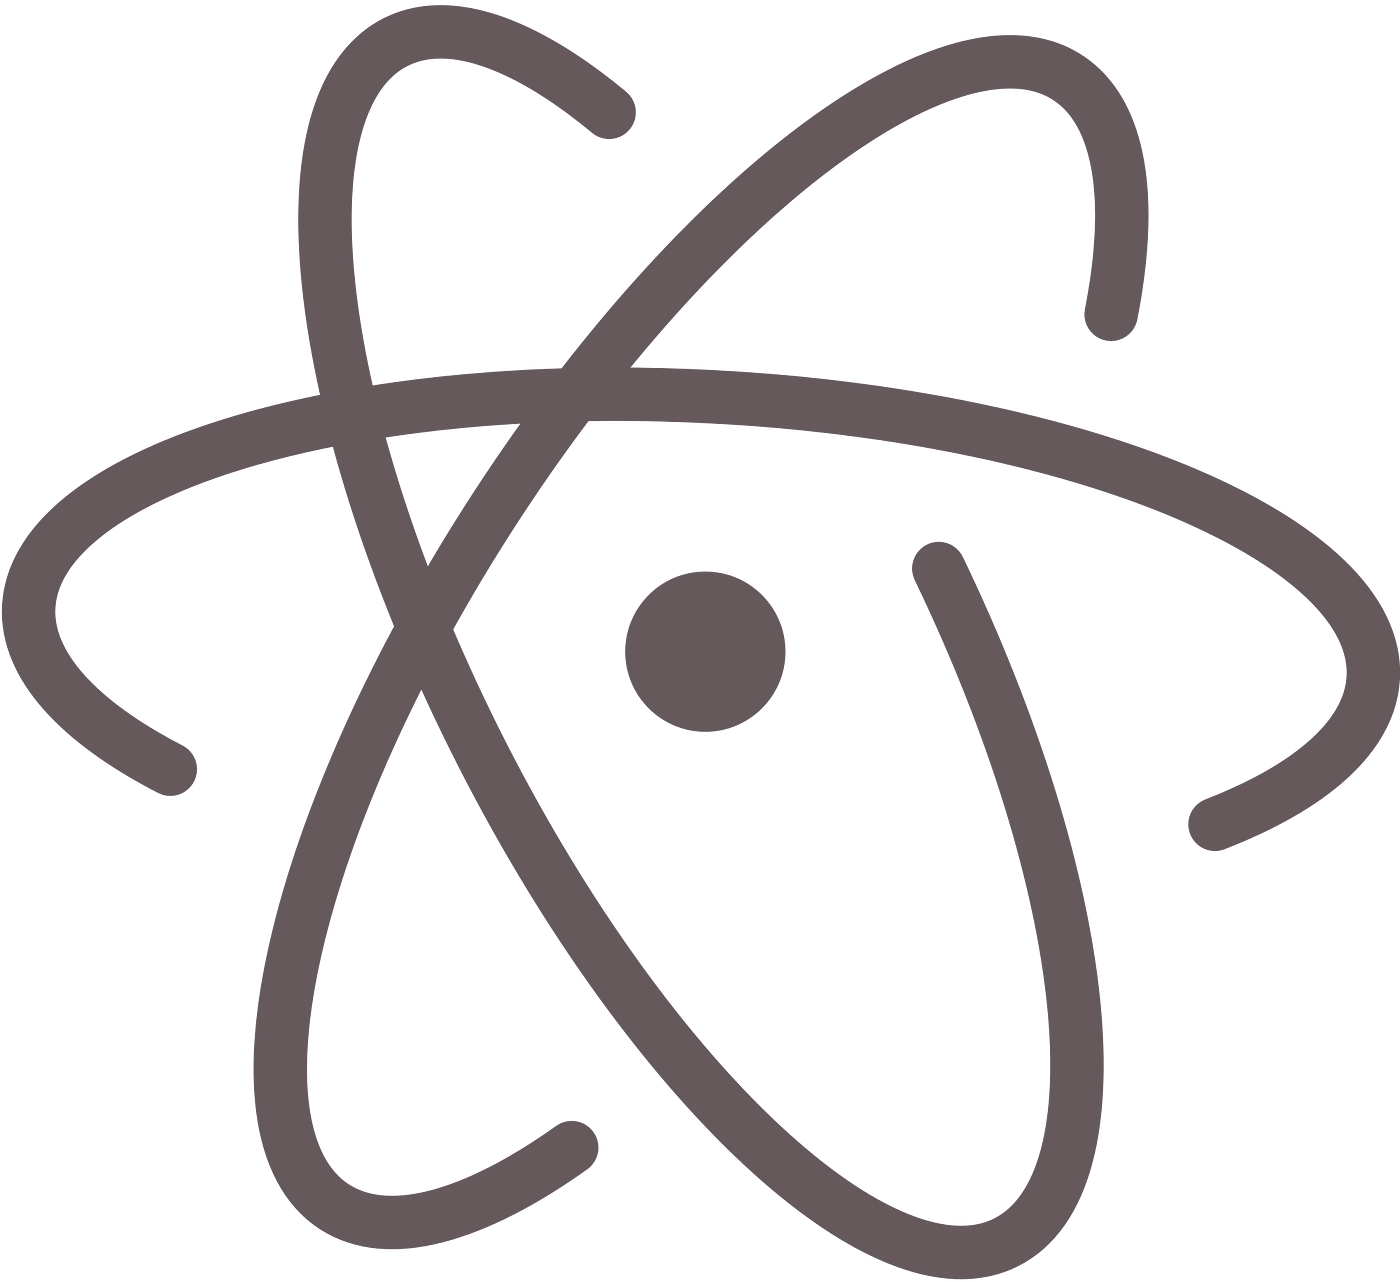 The atom packages I'm currently using | by Jason Arnold | Medium